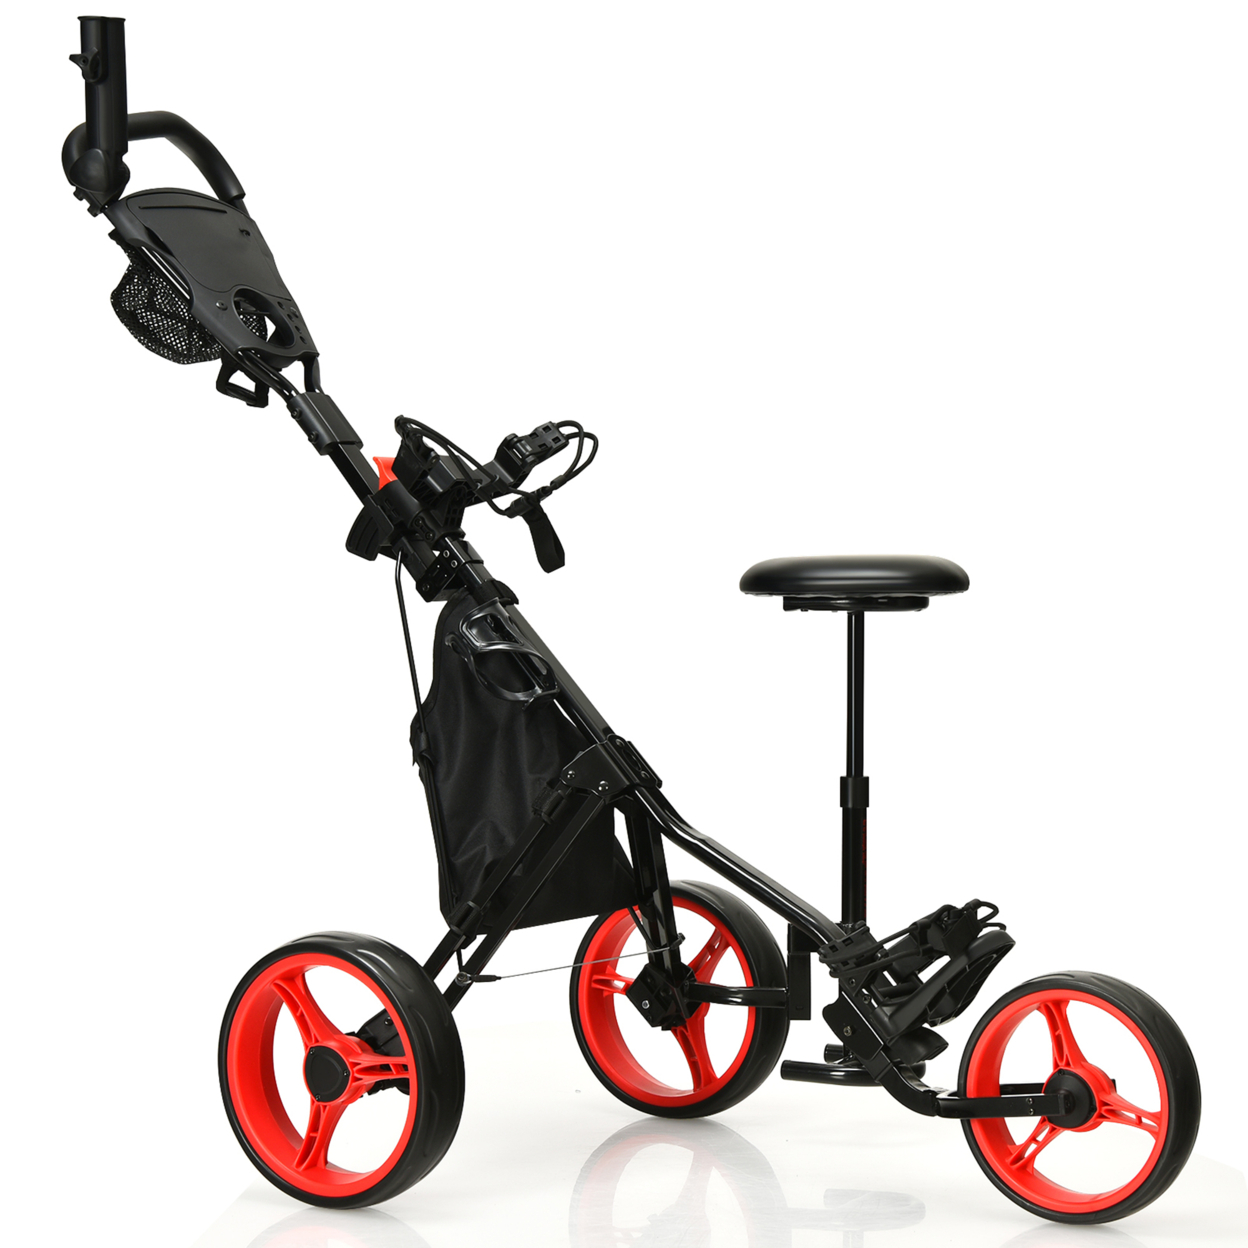 3-Wheel Foldable Golf Push Pull Cart Trolley W/ Seat Adjustable Handle - Red